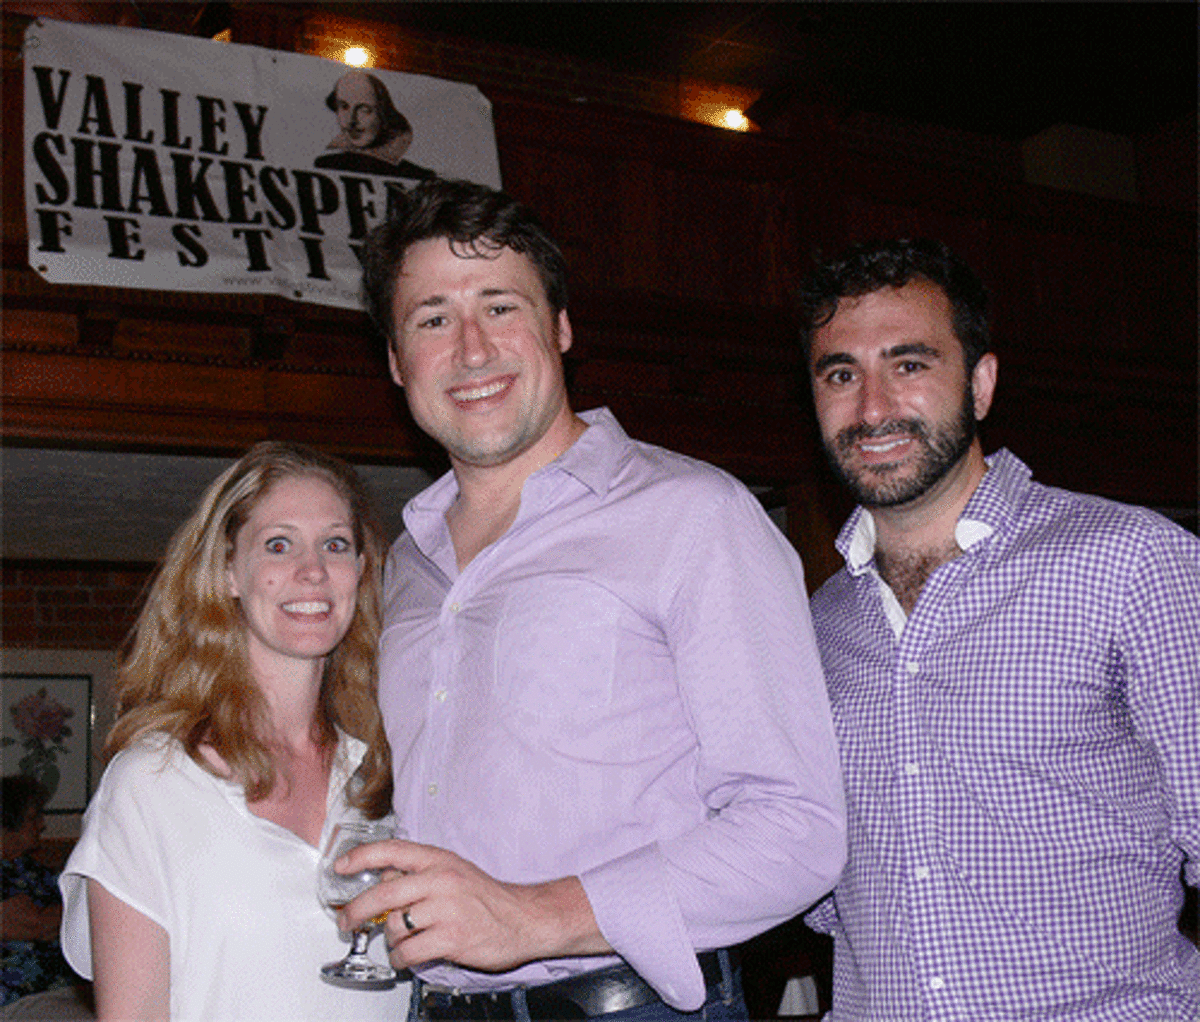 From left, “Much Ado About Nothing” cast members Megan Emery Gaffney, Colin Ryan and Tom Simonetti attend a “Meet and Greet” fund-raising event for Valley Shakespeare Festival on July 2 at the Twisted Vine in Derby. Simonetti, a Shelton native, also is the festival’s executive and artistic director.